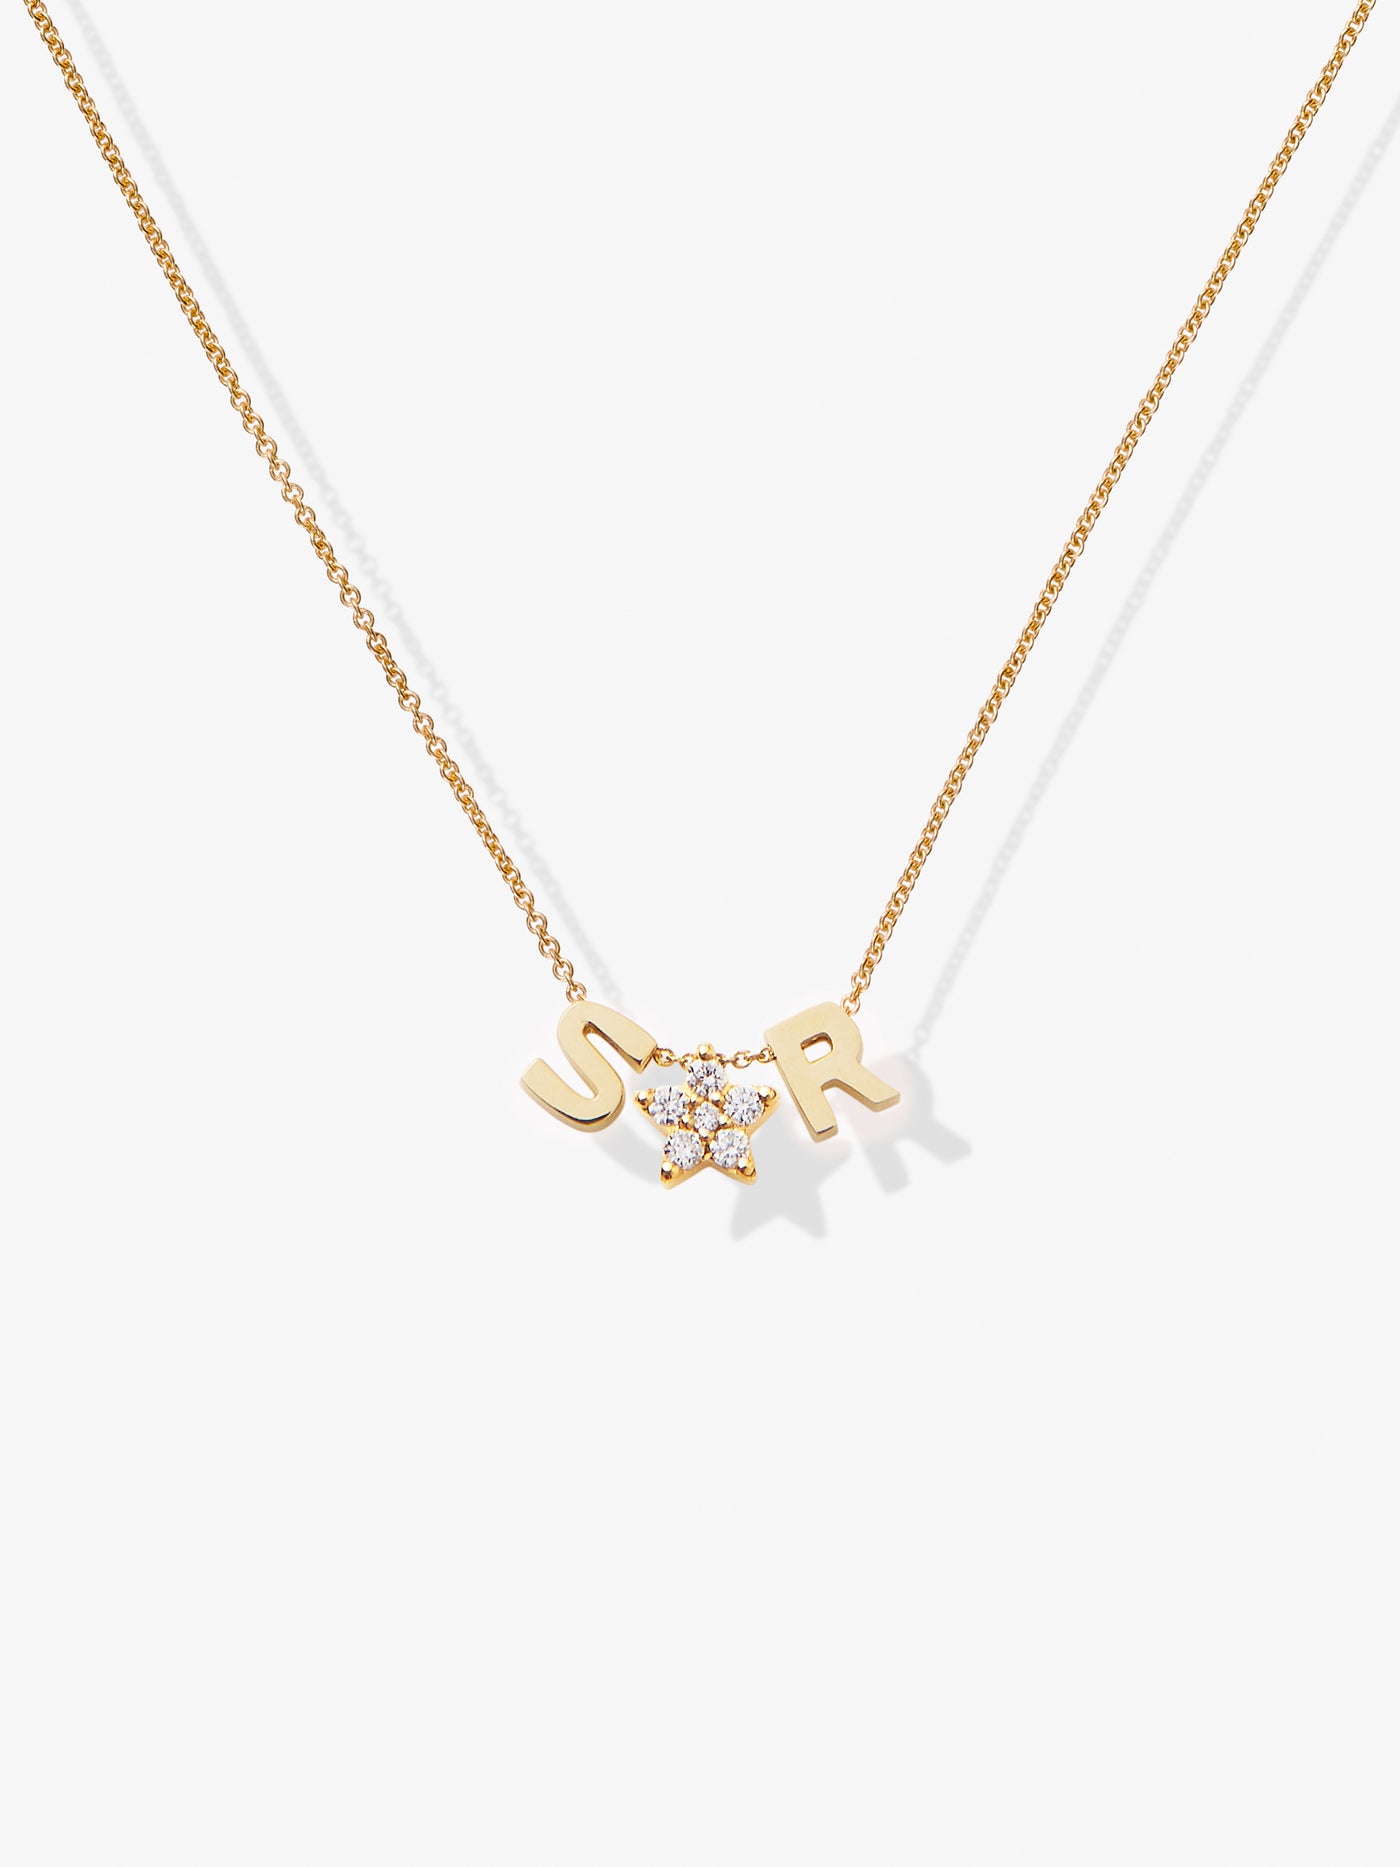 Two Letters and Diamond Star Necklace in 18k Gold